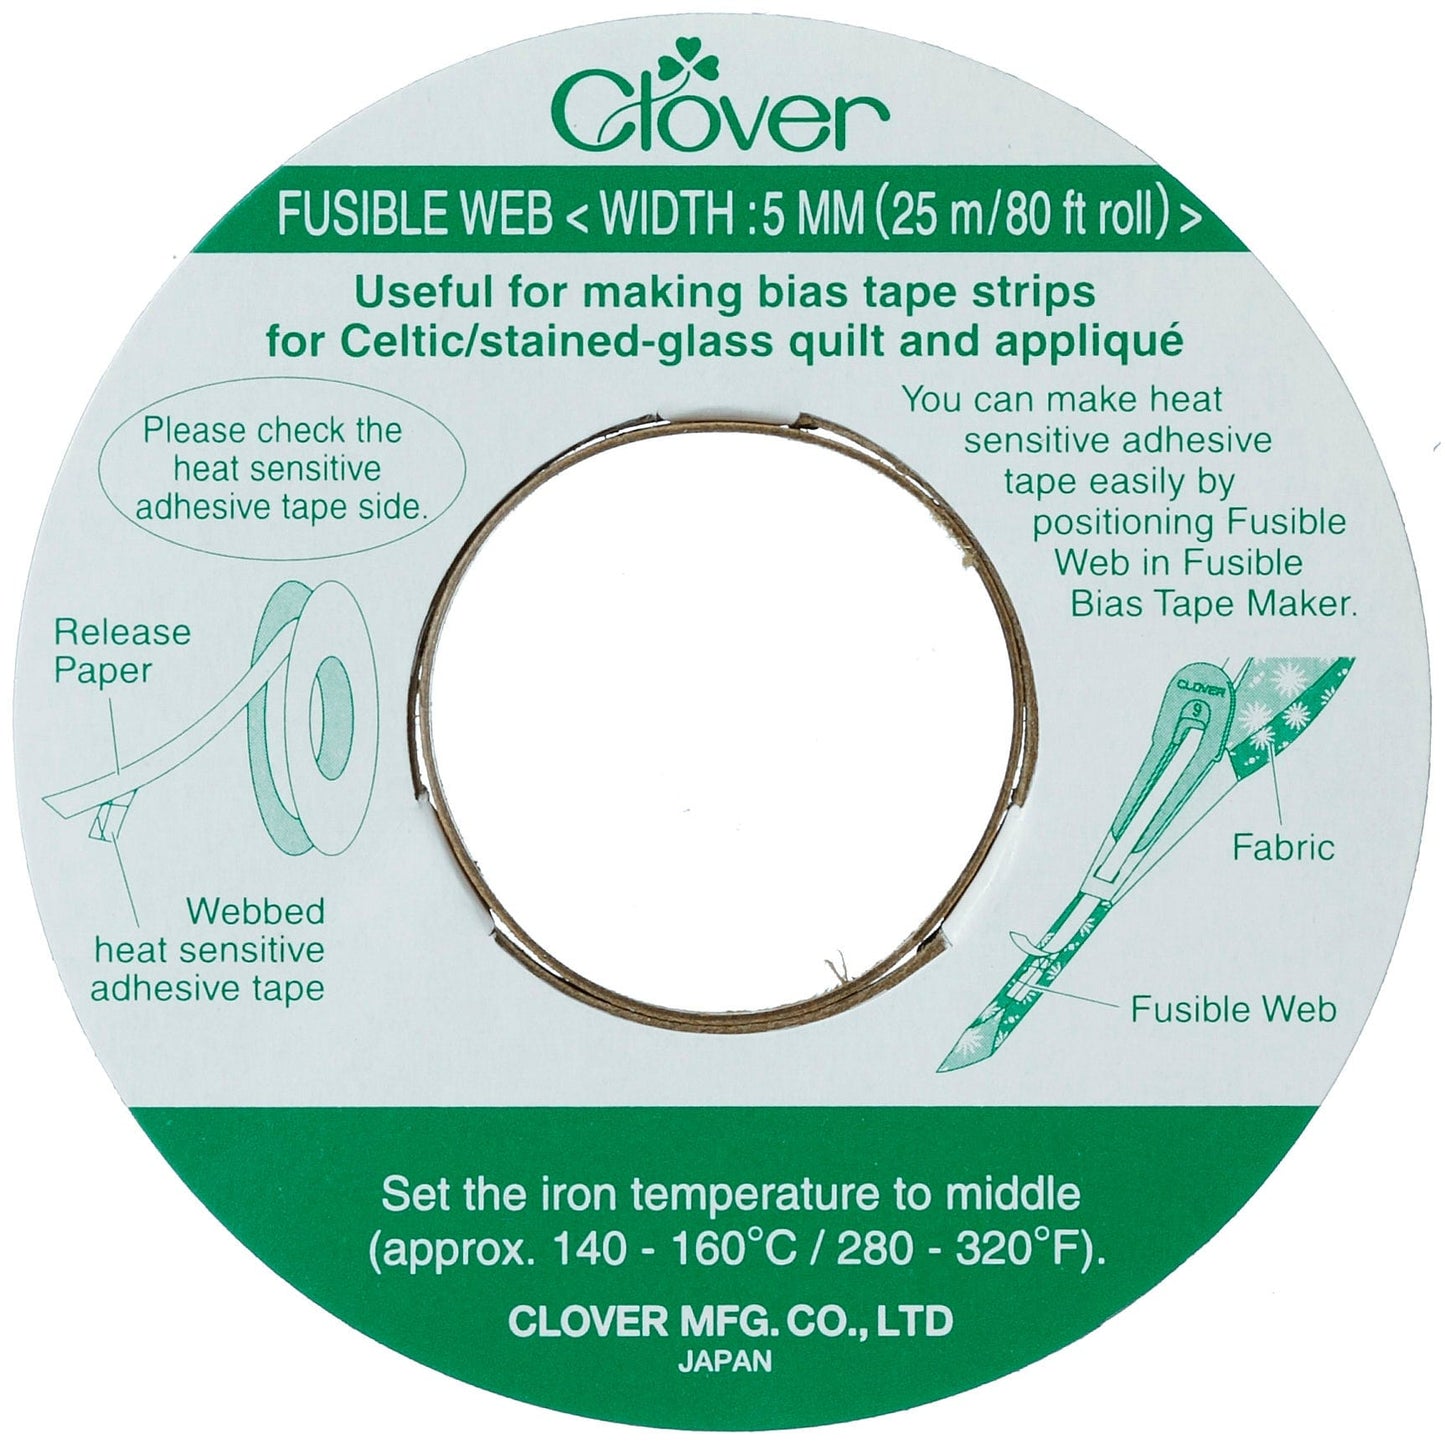 Clover 5mm Fusible Web - 25m roll